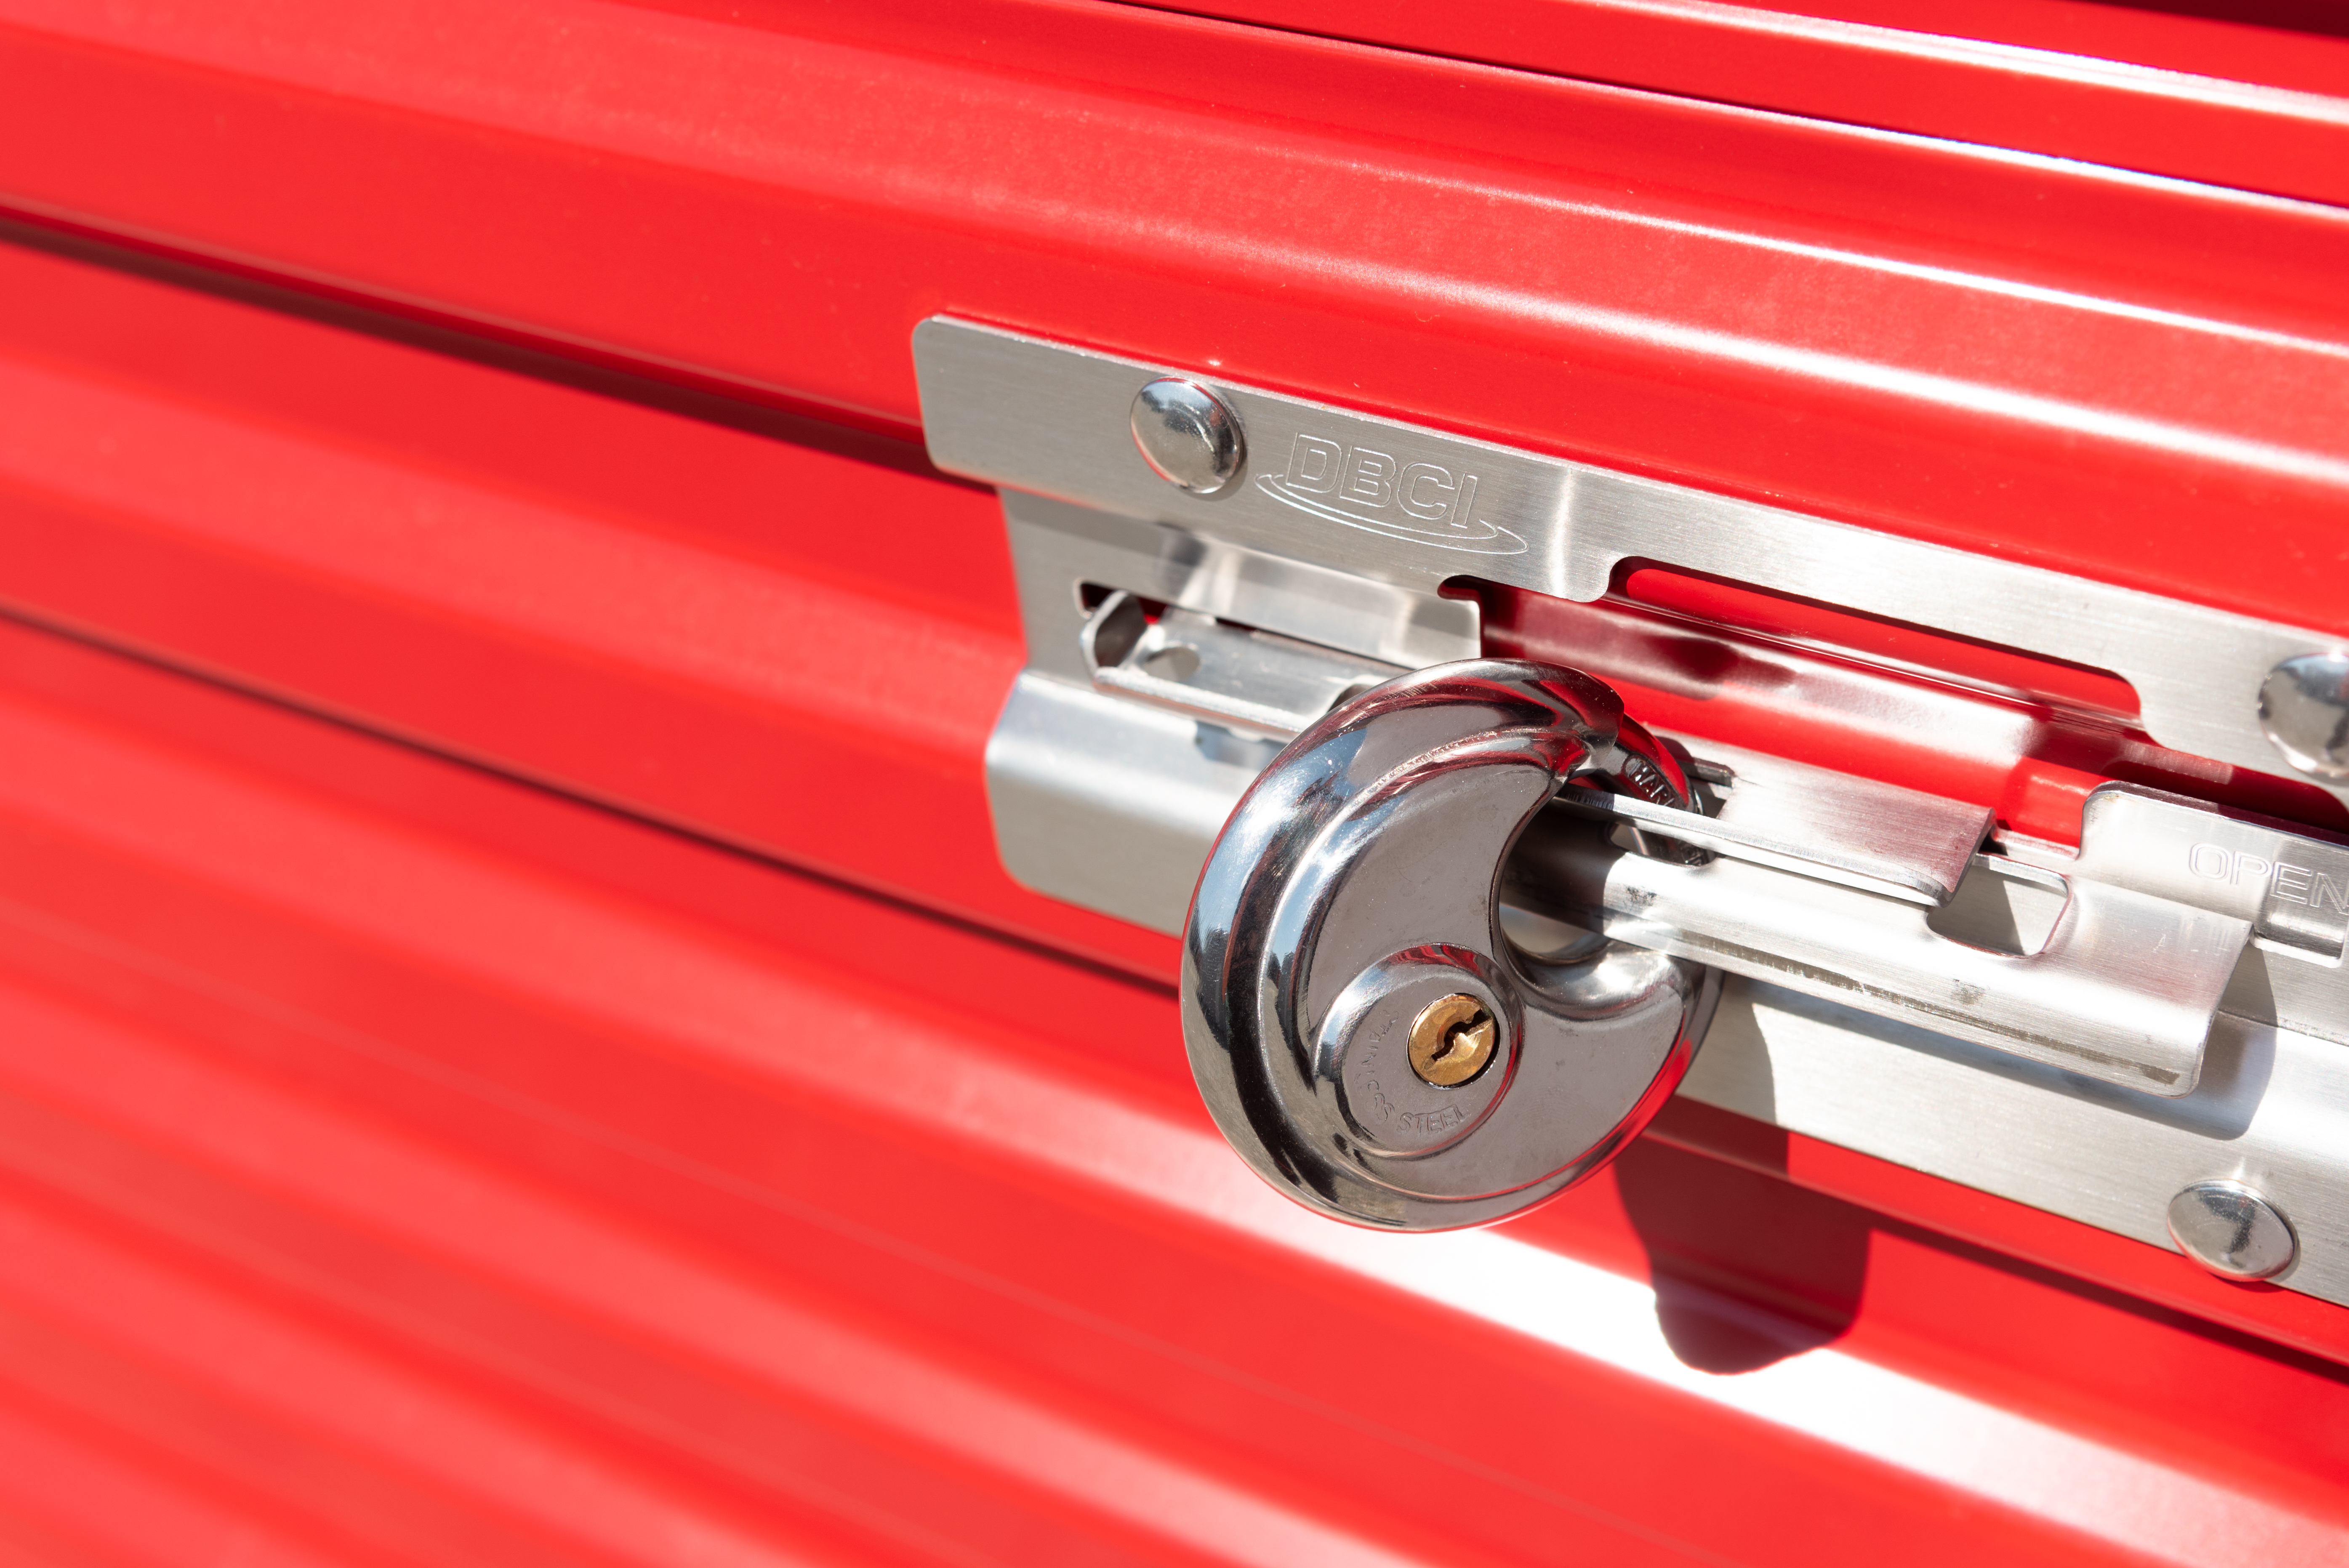 We issue a disc lock with every unit we rent for maximum security. 